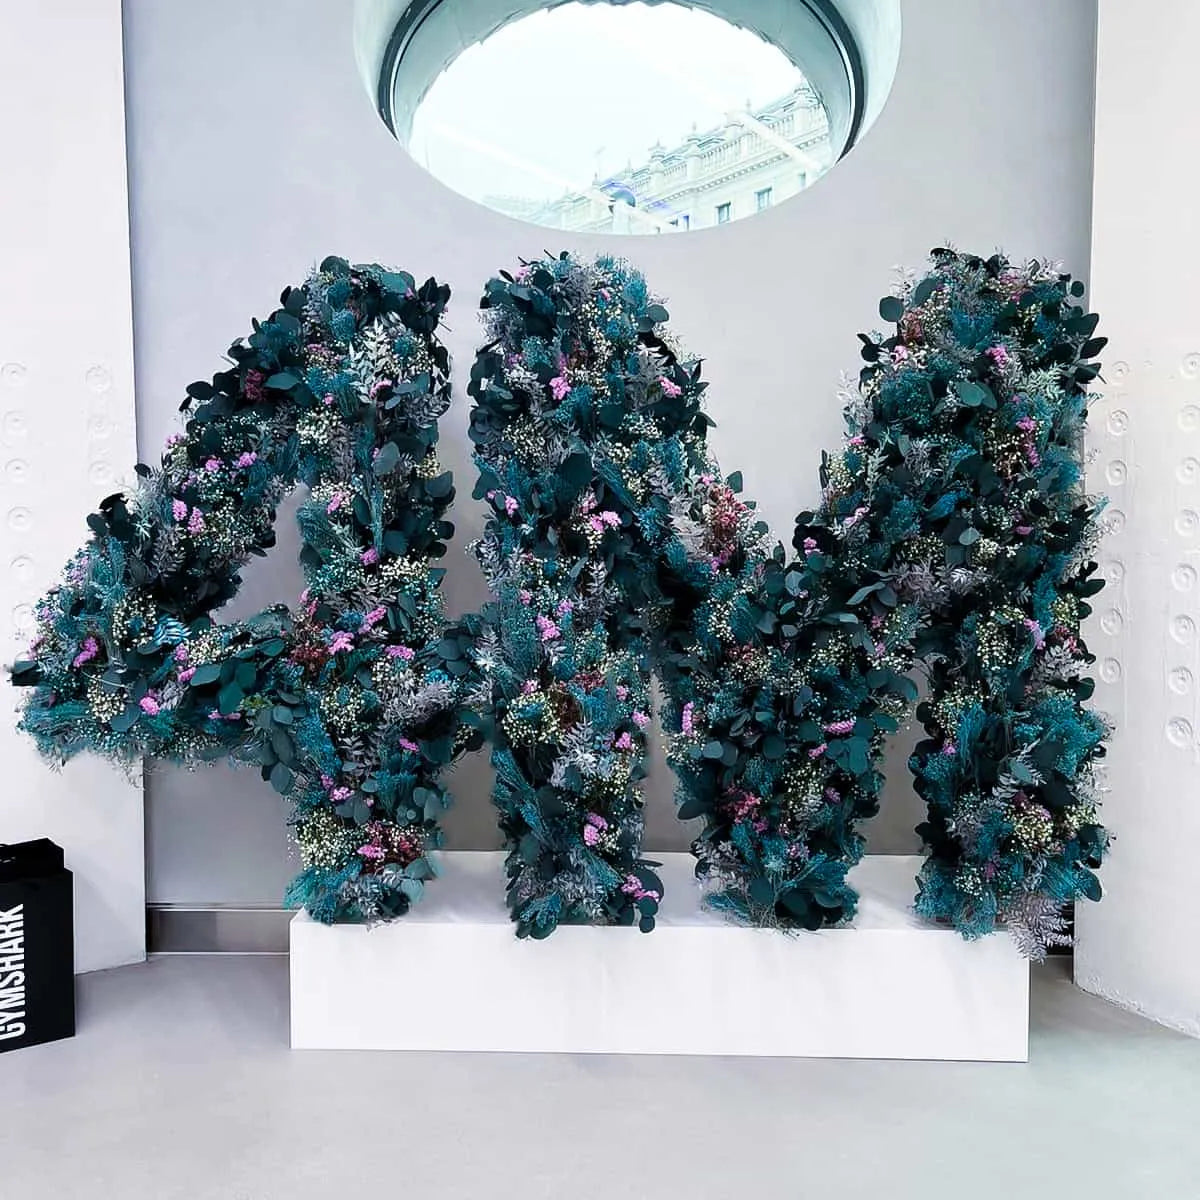 Gymshark partnered with event florist Amaranté London to bring some sustainable floral installations to their London Regents street store